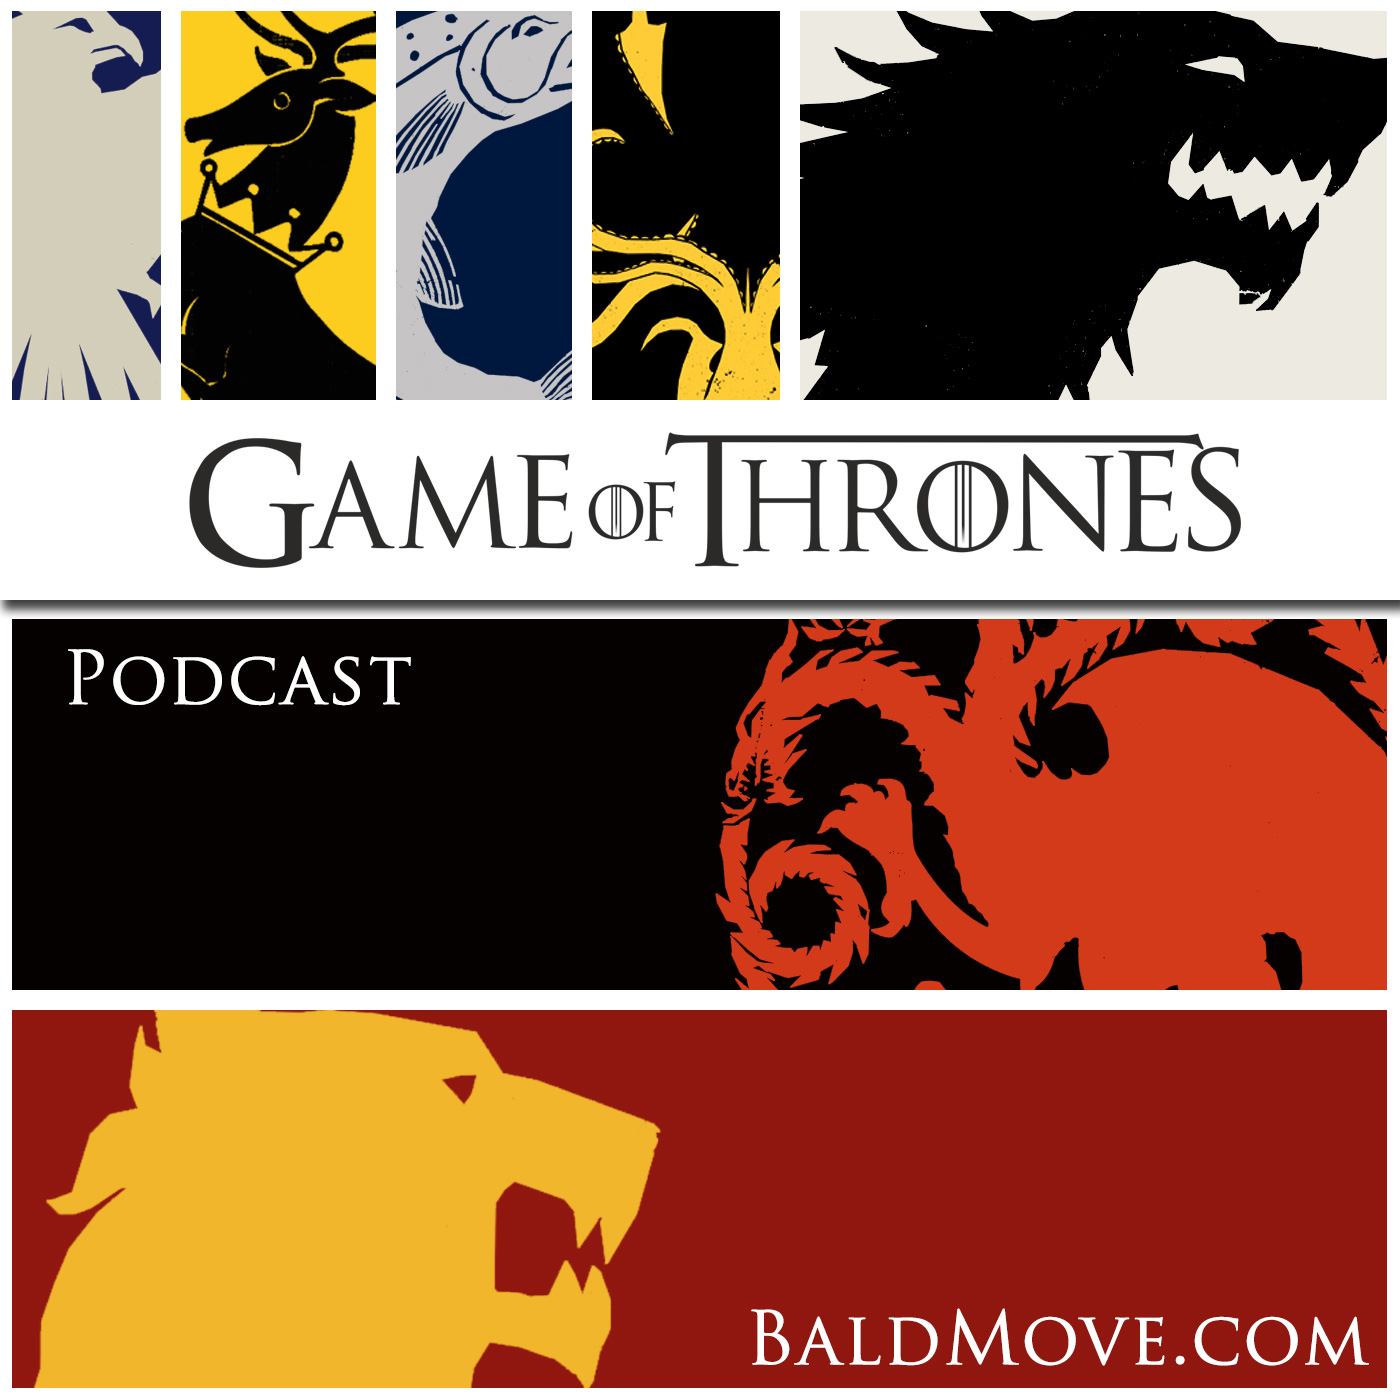 Game of Thrones The Podcast:Bald Move